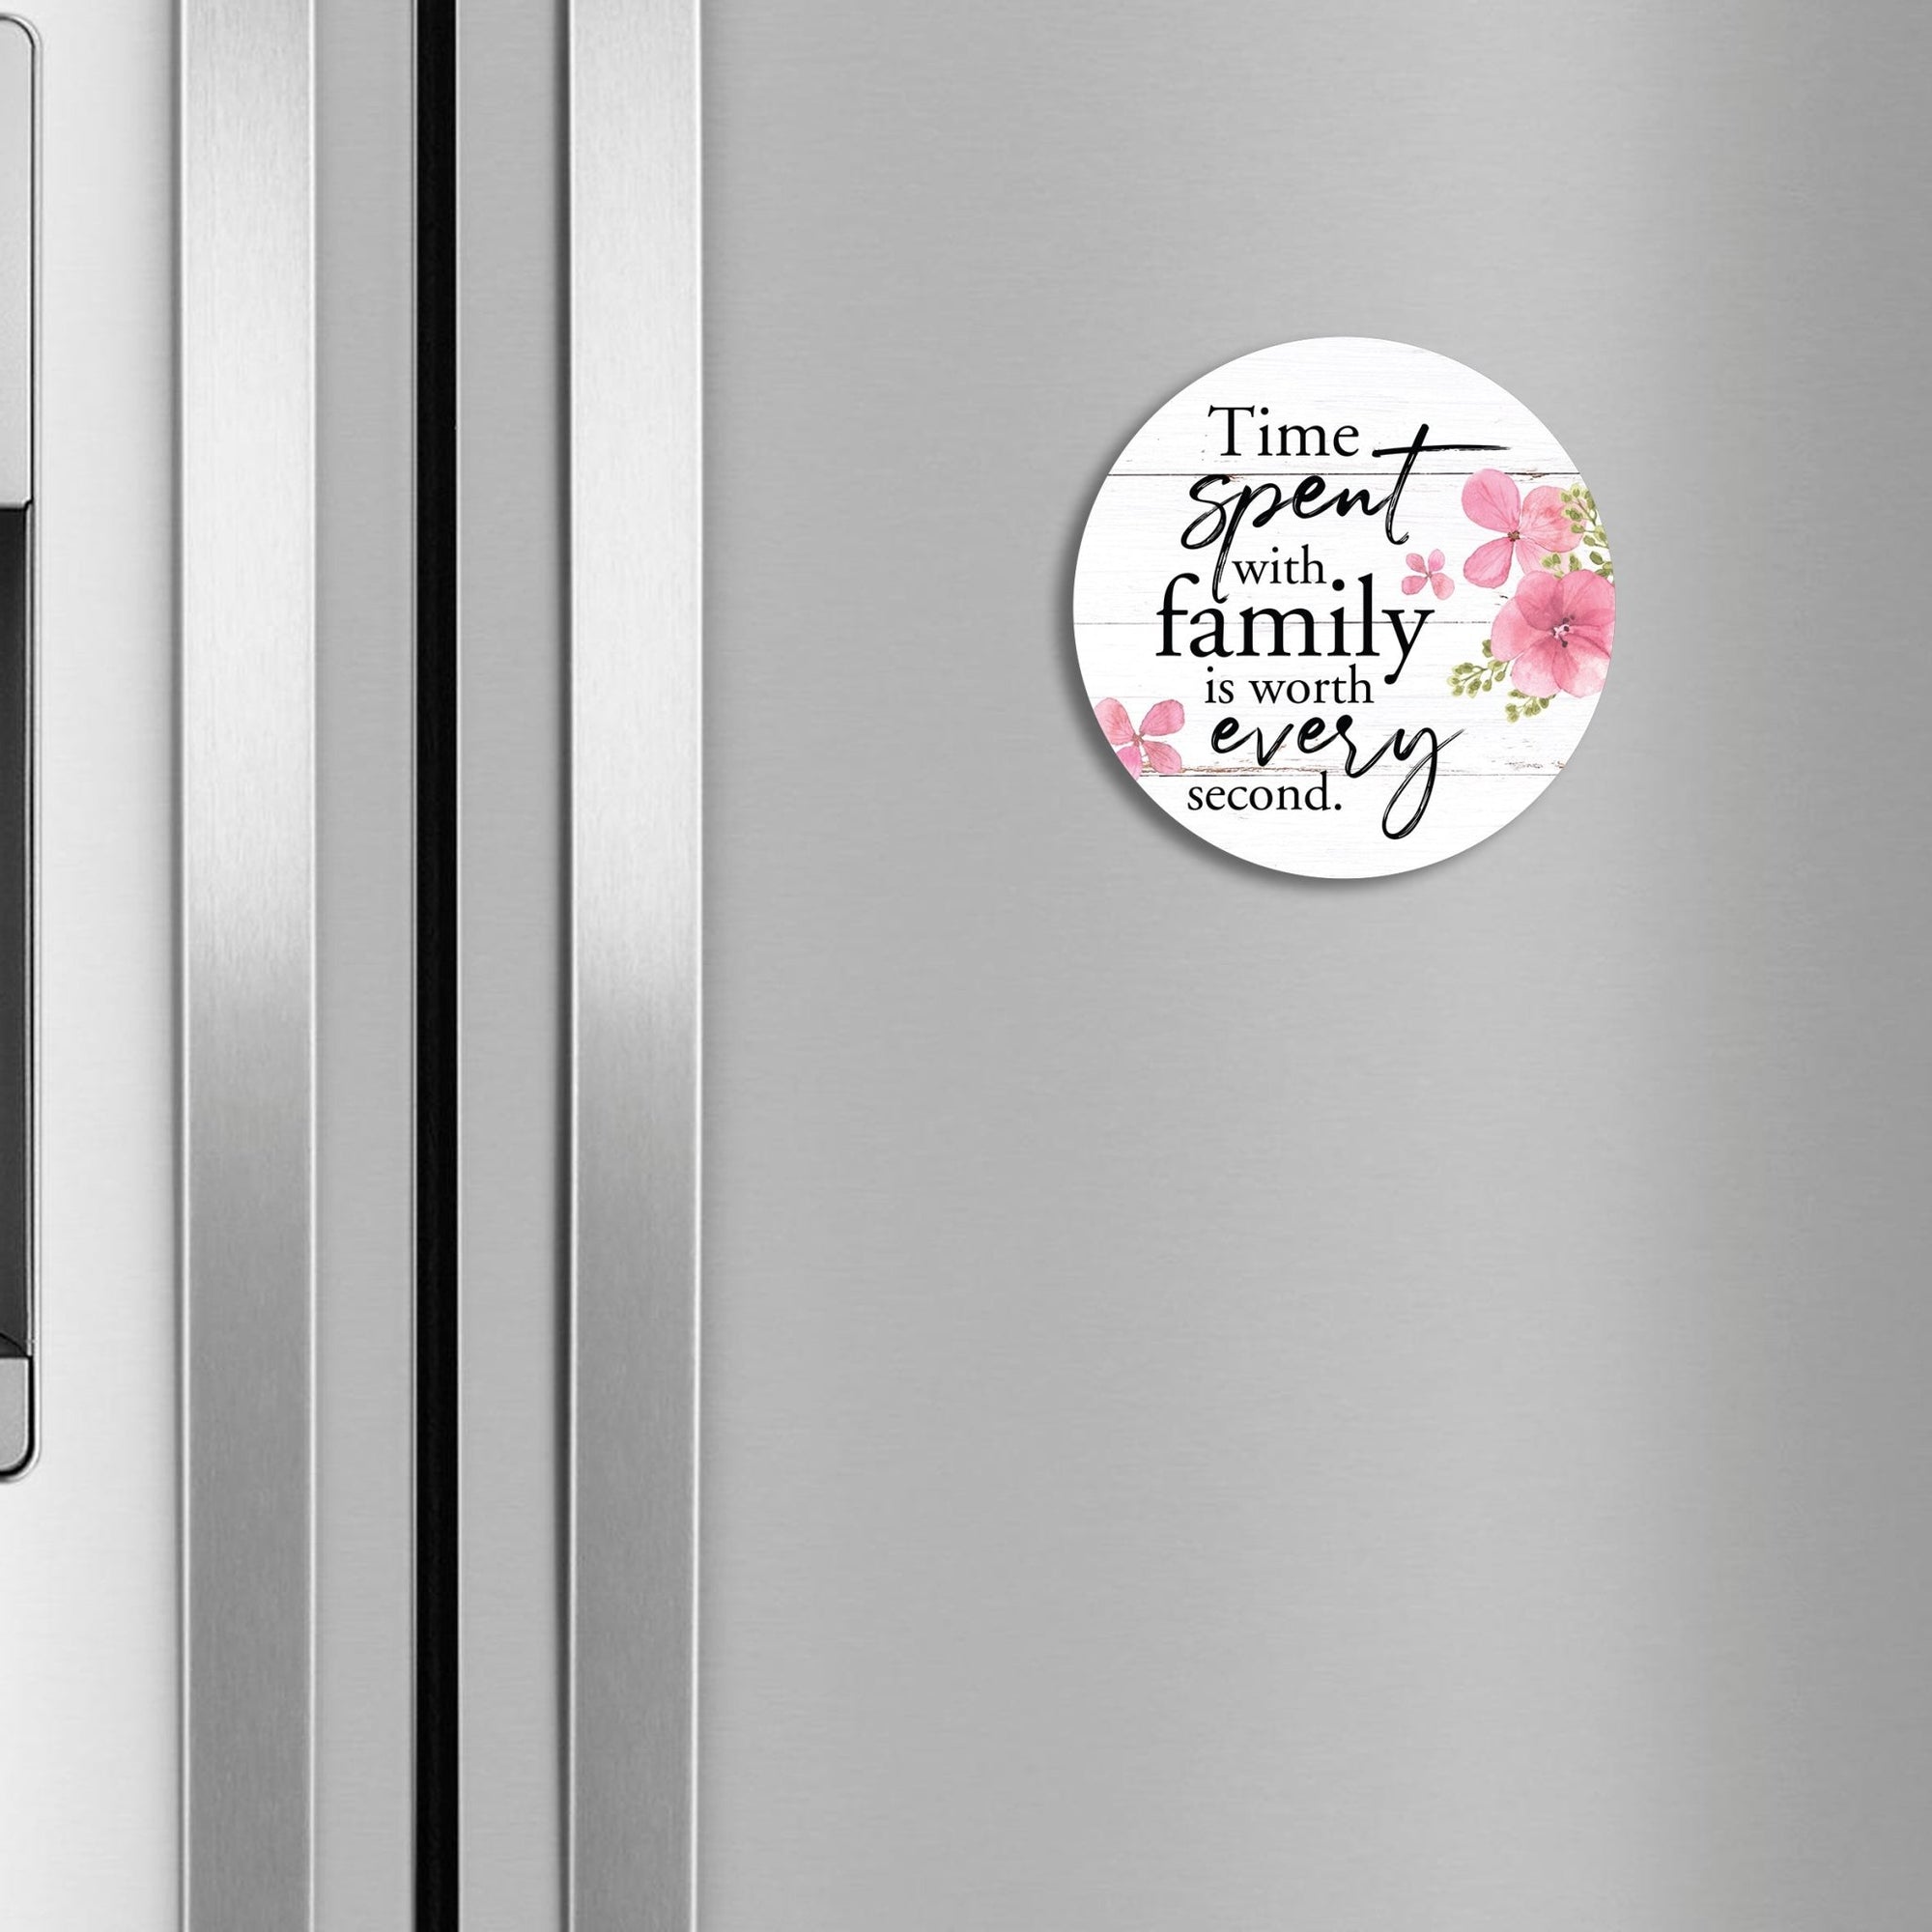 Family & Home Refrigerator Magnet Perfect Gift Idea For Home Décor - Time Spent